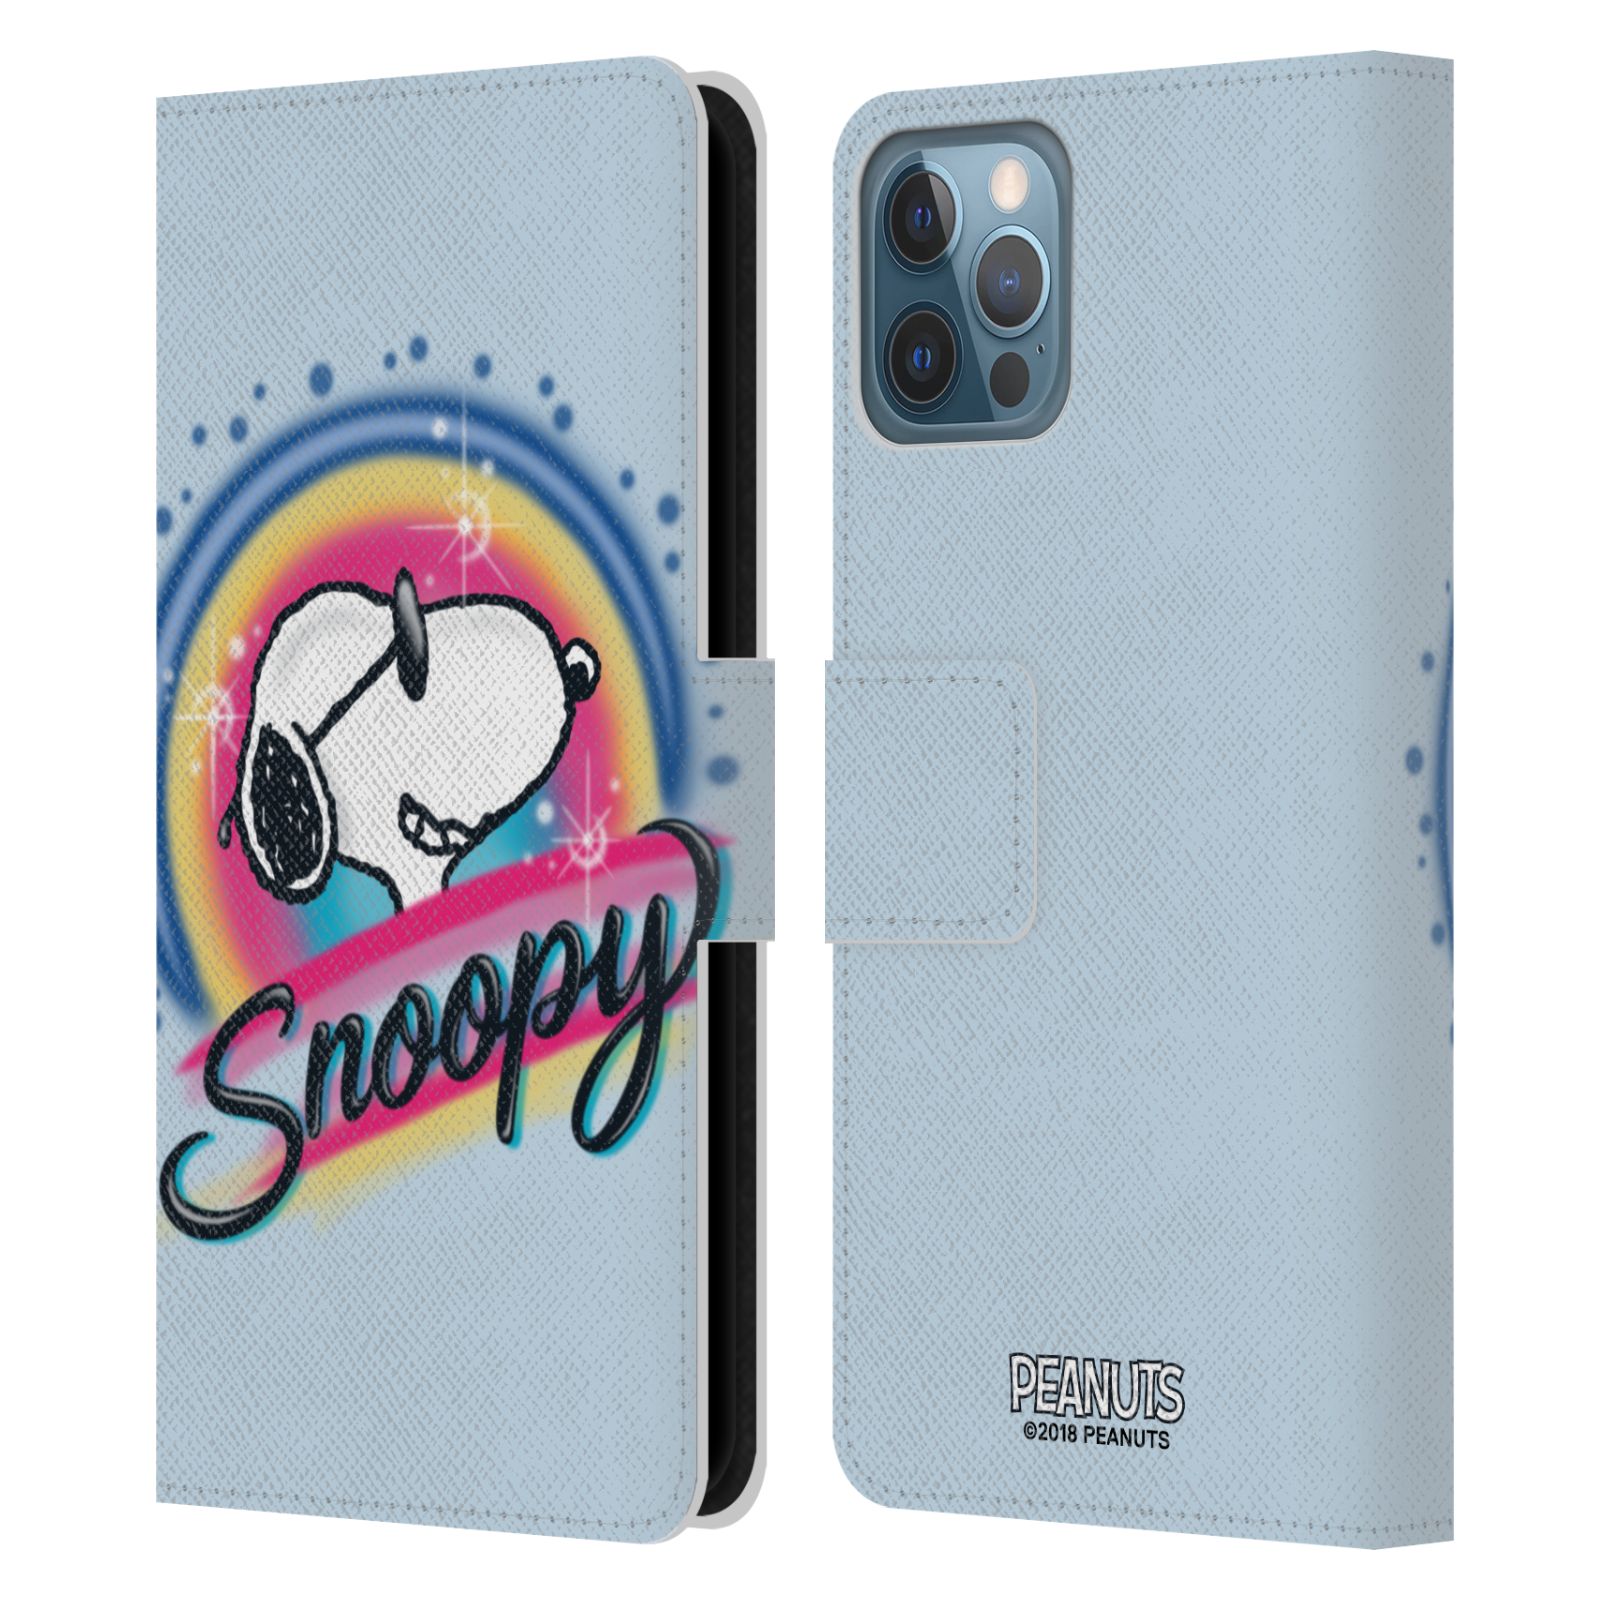 Pouzdro na mobil Apple Iphone 12 / 12 Pro - HEAD CASE - Peanuts Snoopy Superstar 2